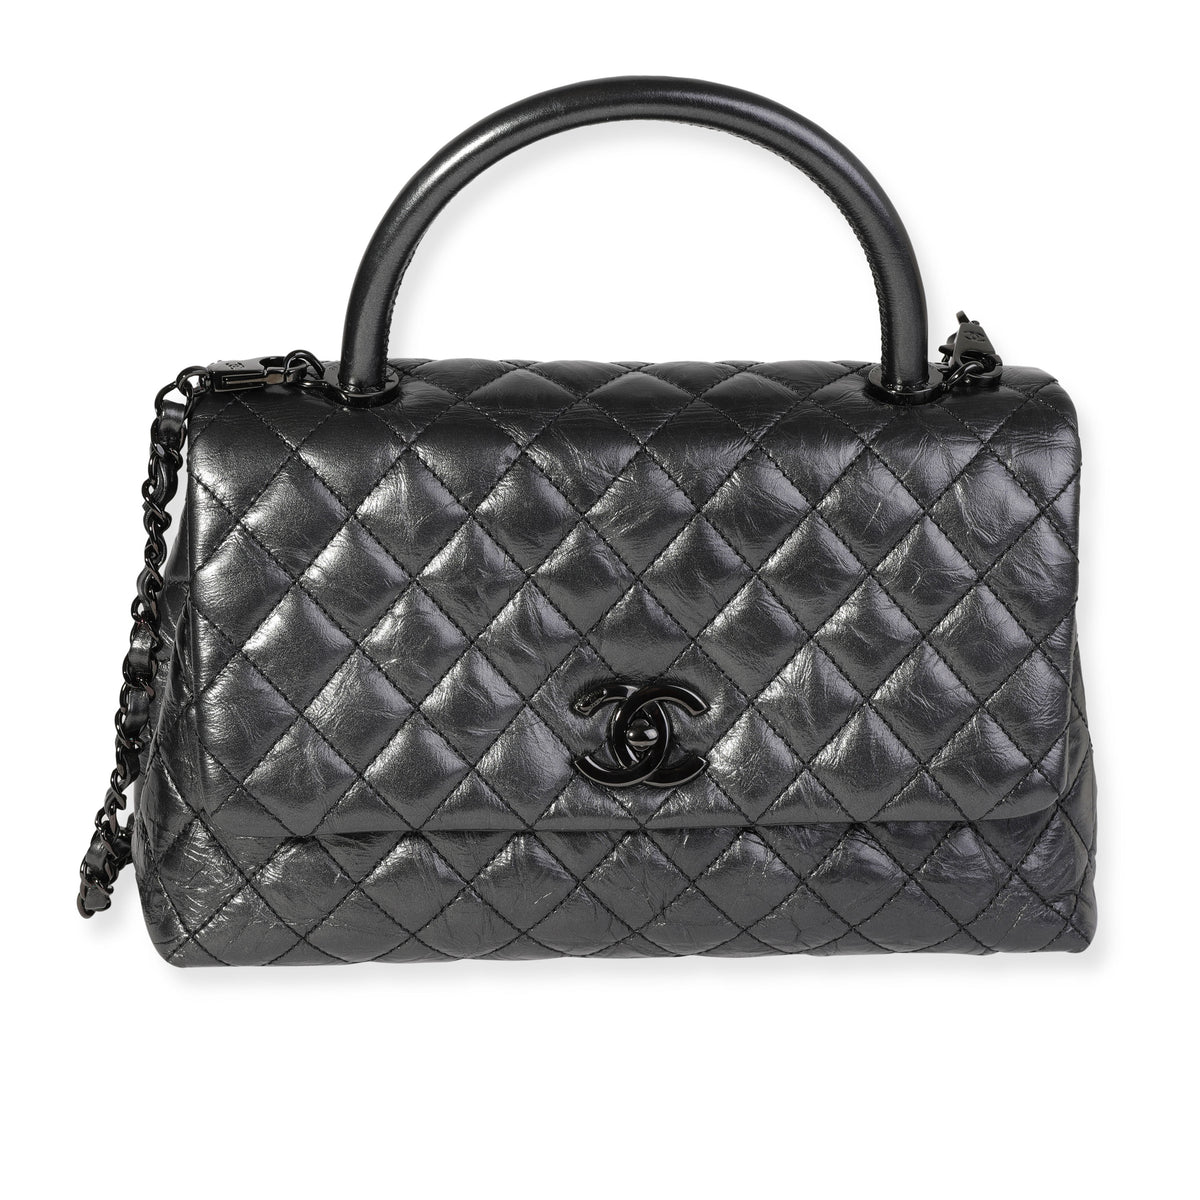 CHANEL Pre-Owned 1962-1964 2.55 diamond-quilted Shoulder Bag